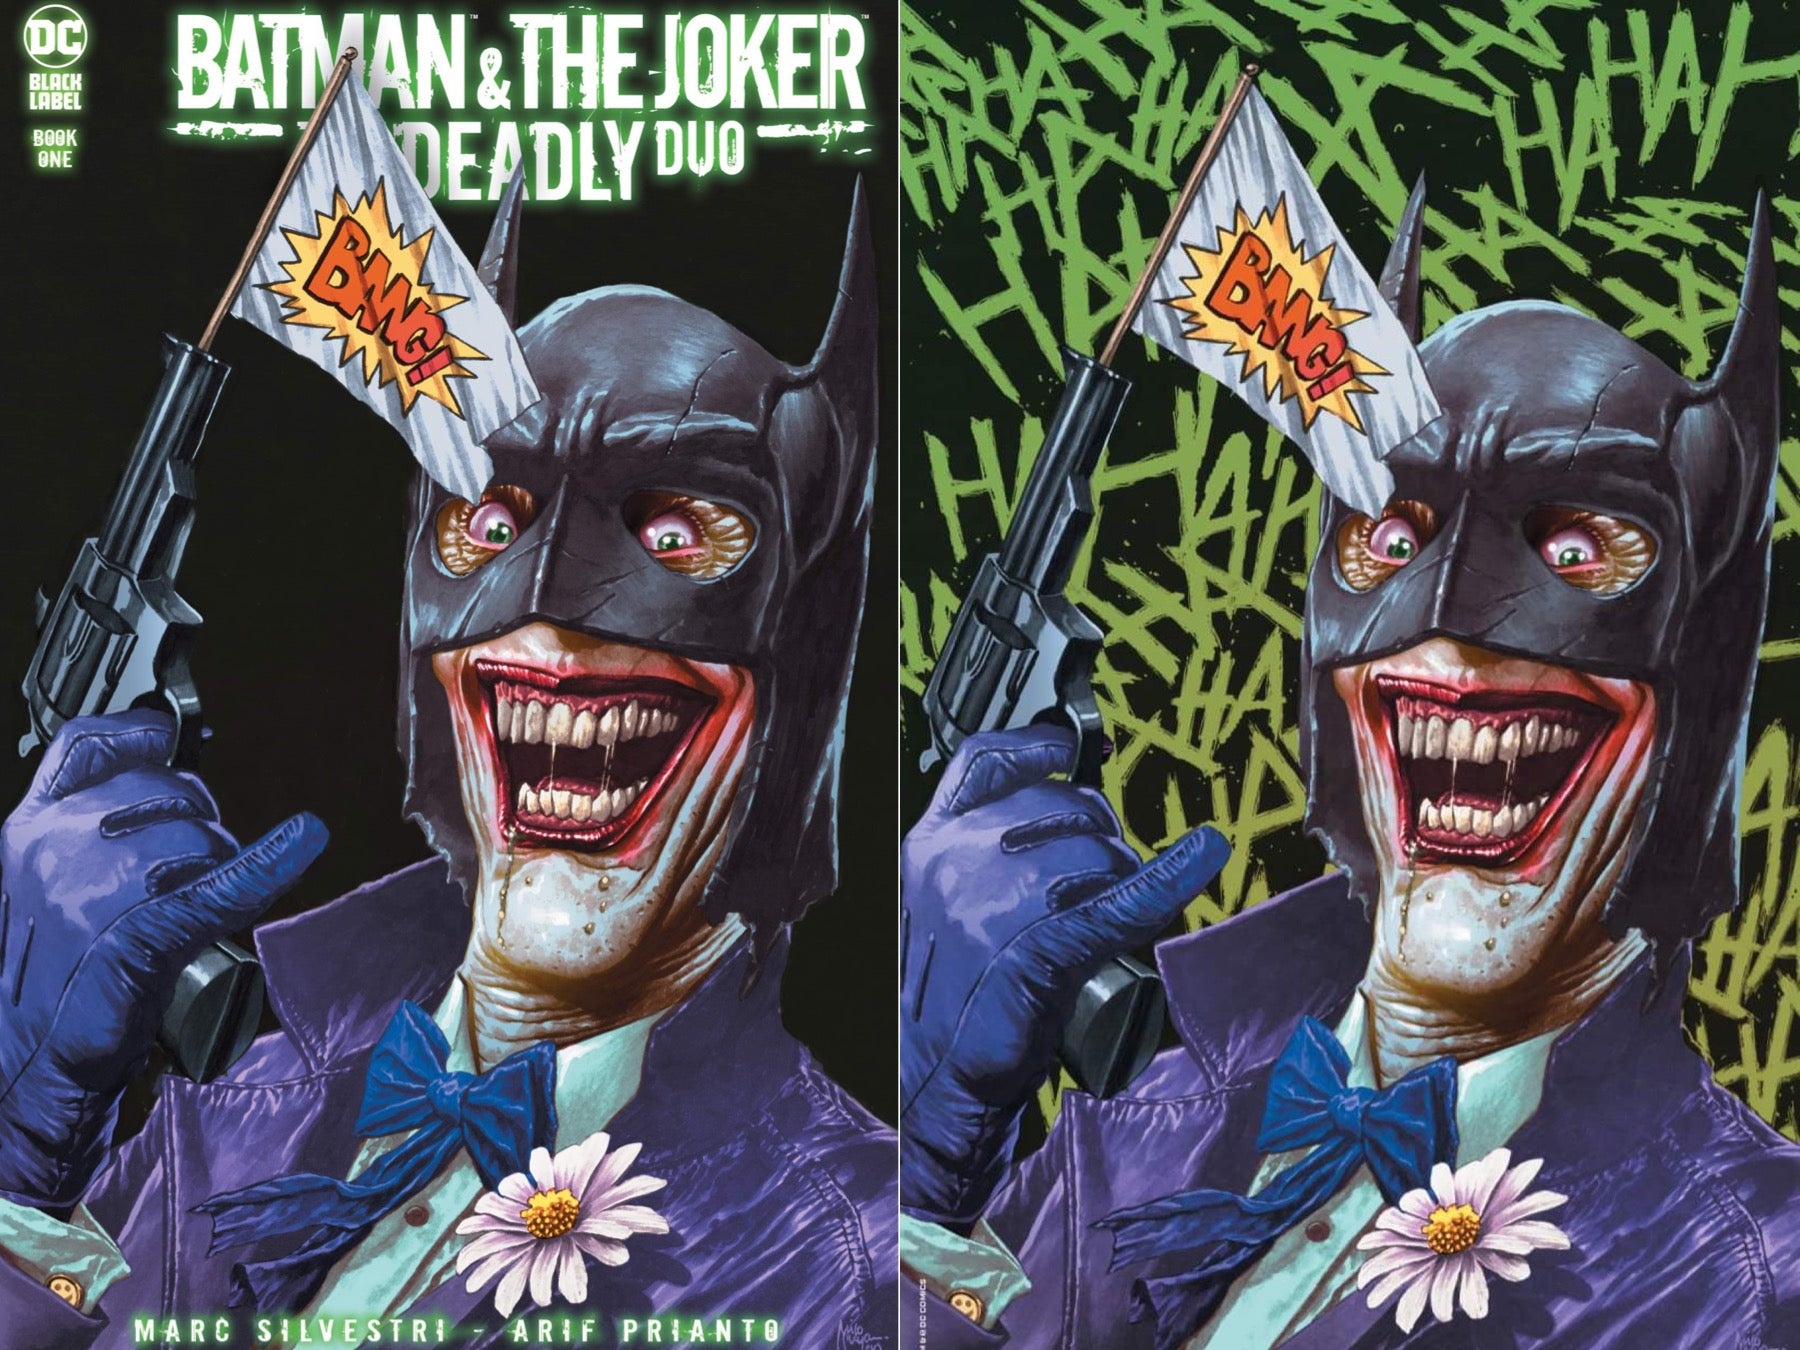 11/01/2022 BATMAN & THE JOKER THE DEADLY DUO #1 MICO SUAYAN EXCLUSIVE VARIANT OPTIONS